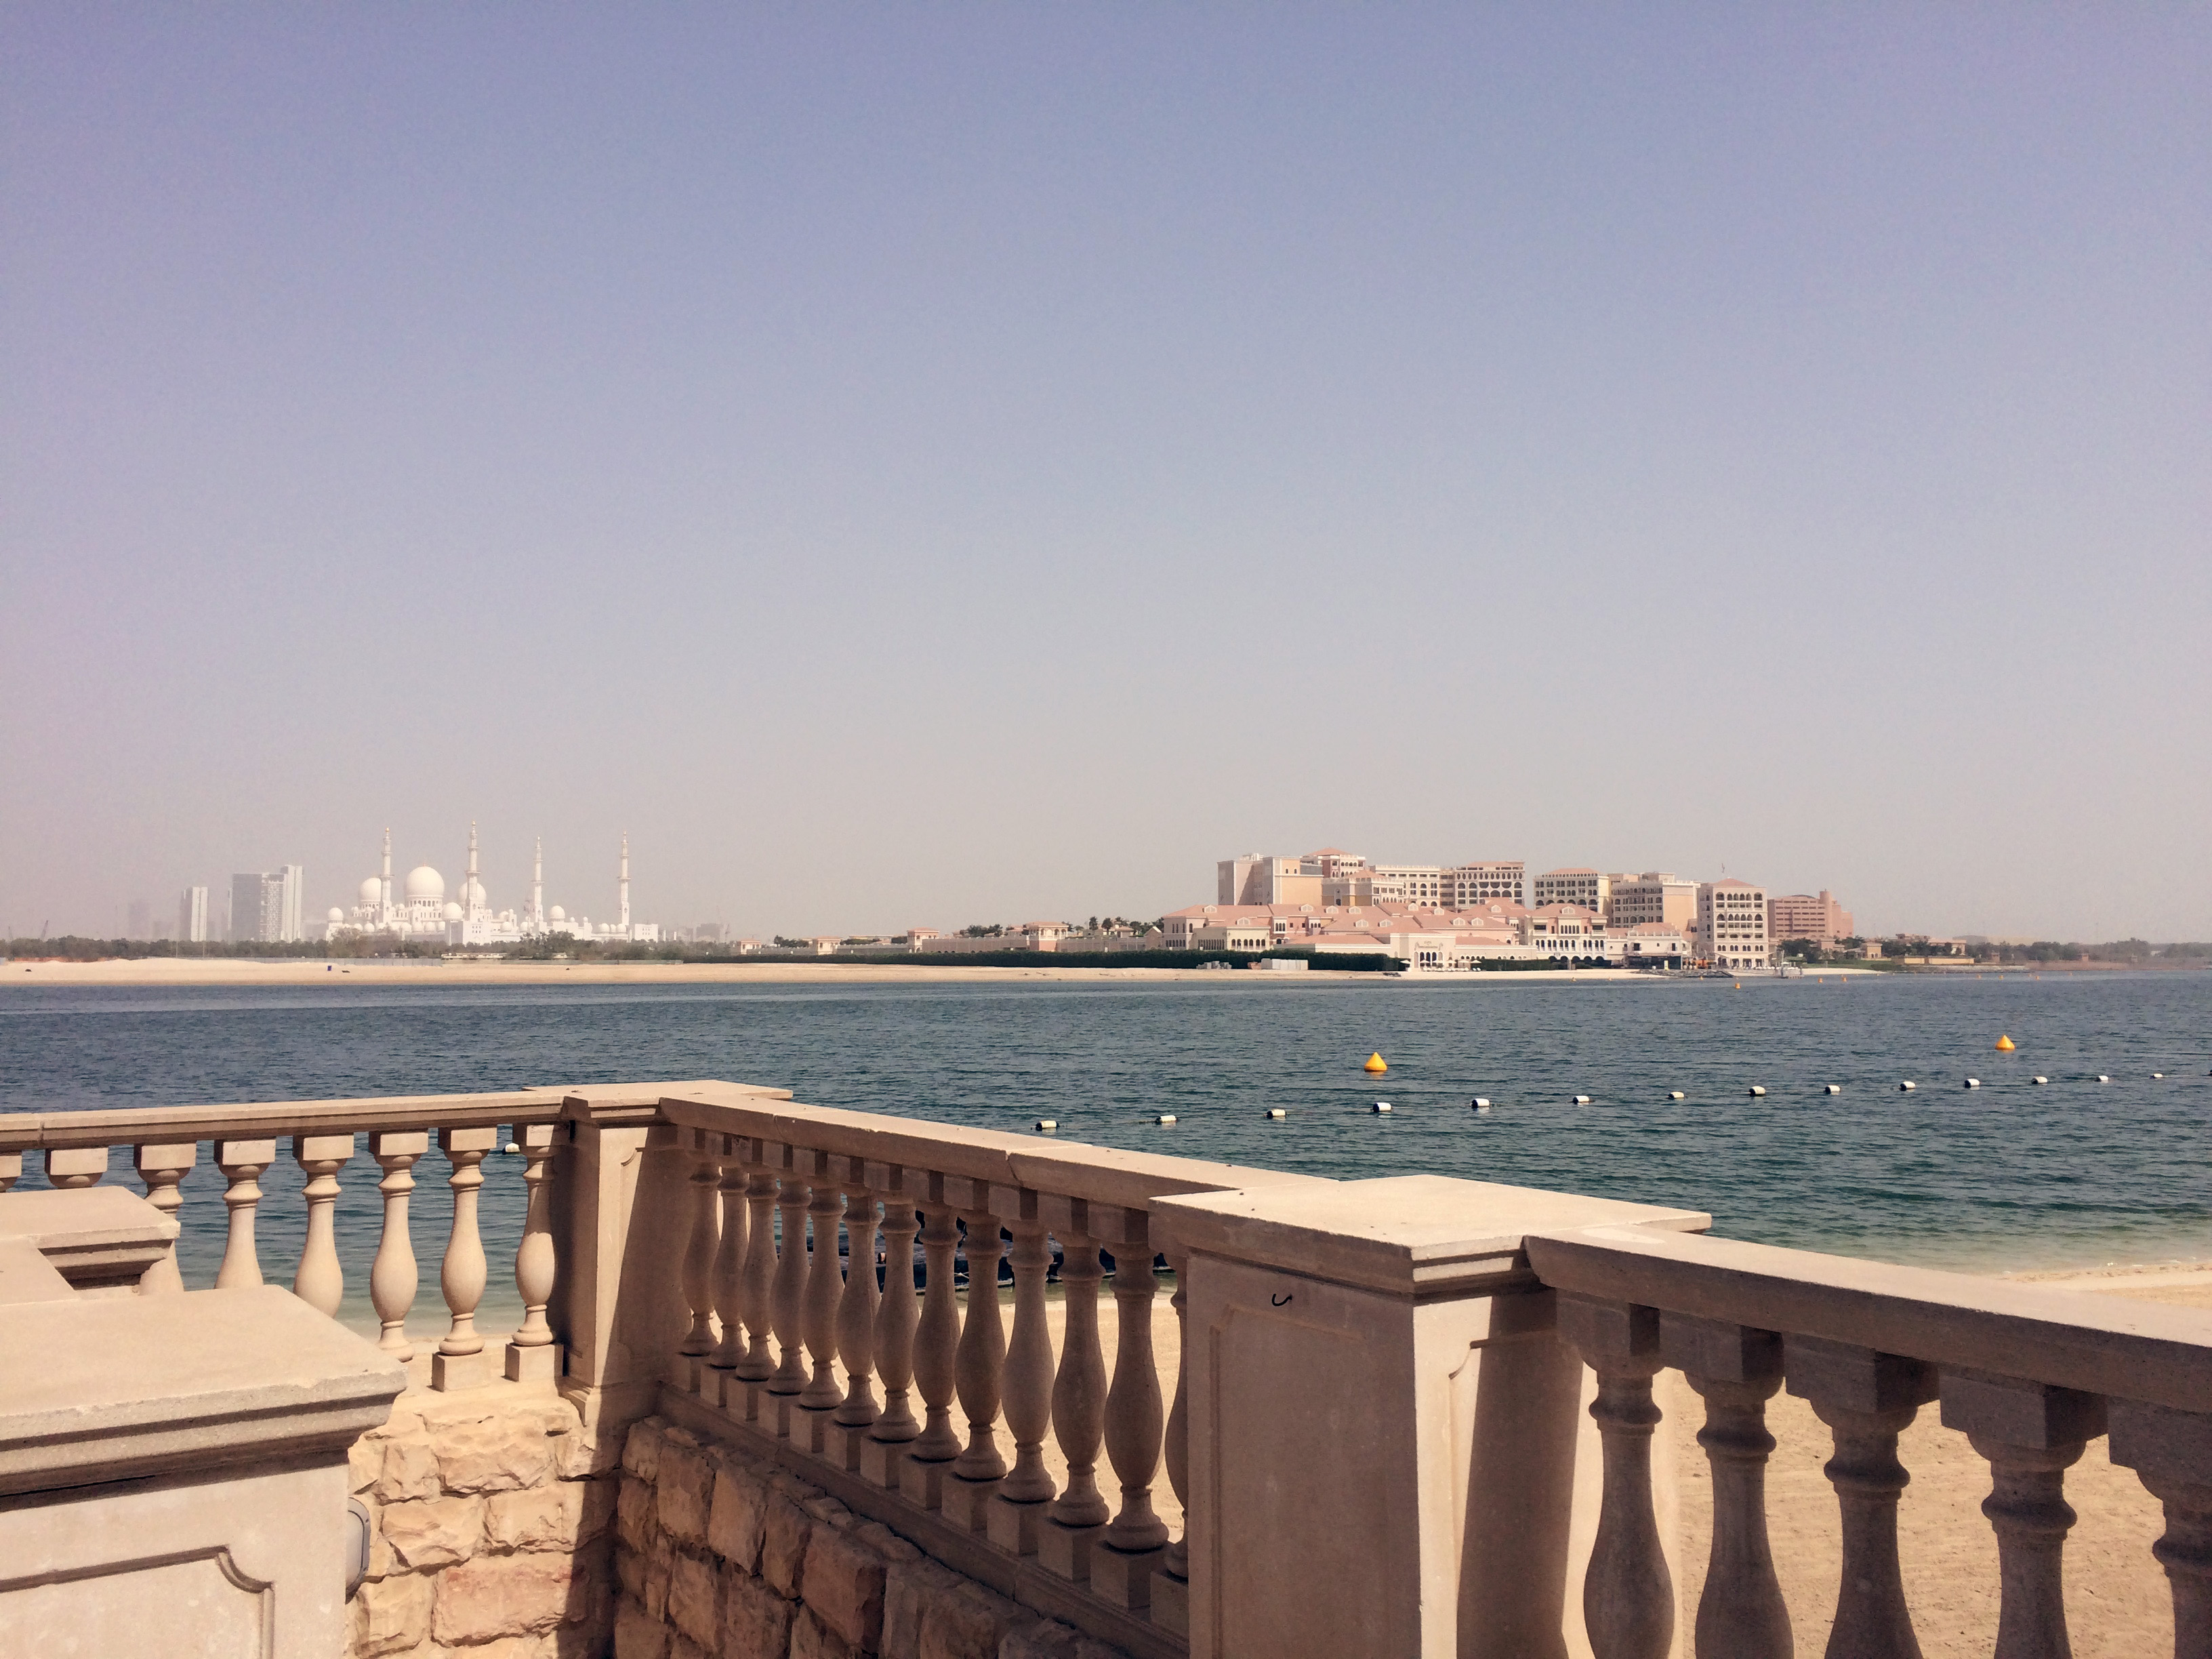 View across the water to the Sheikh Zayed Grand Mosque